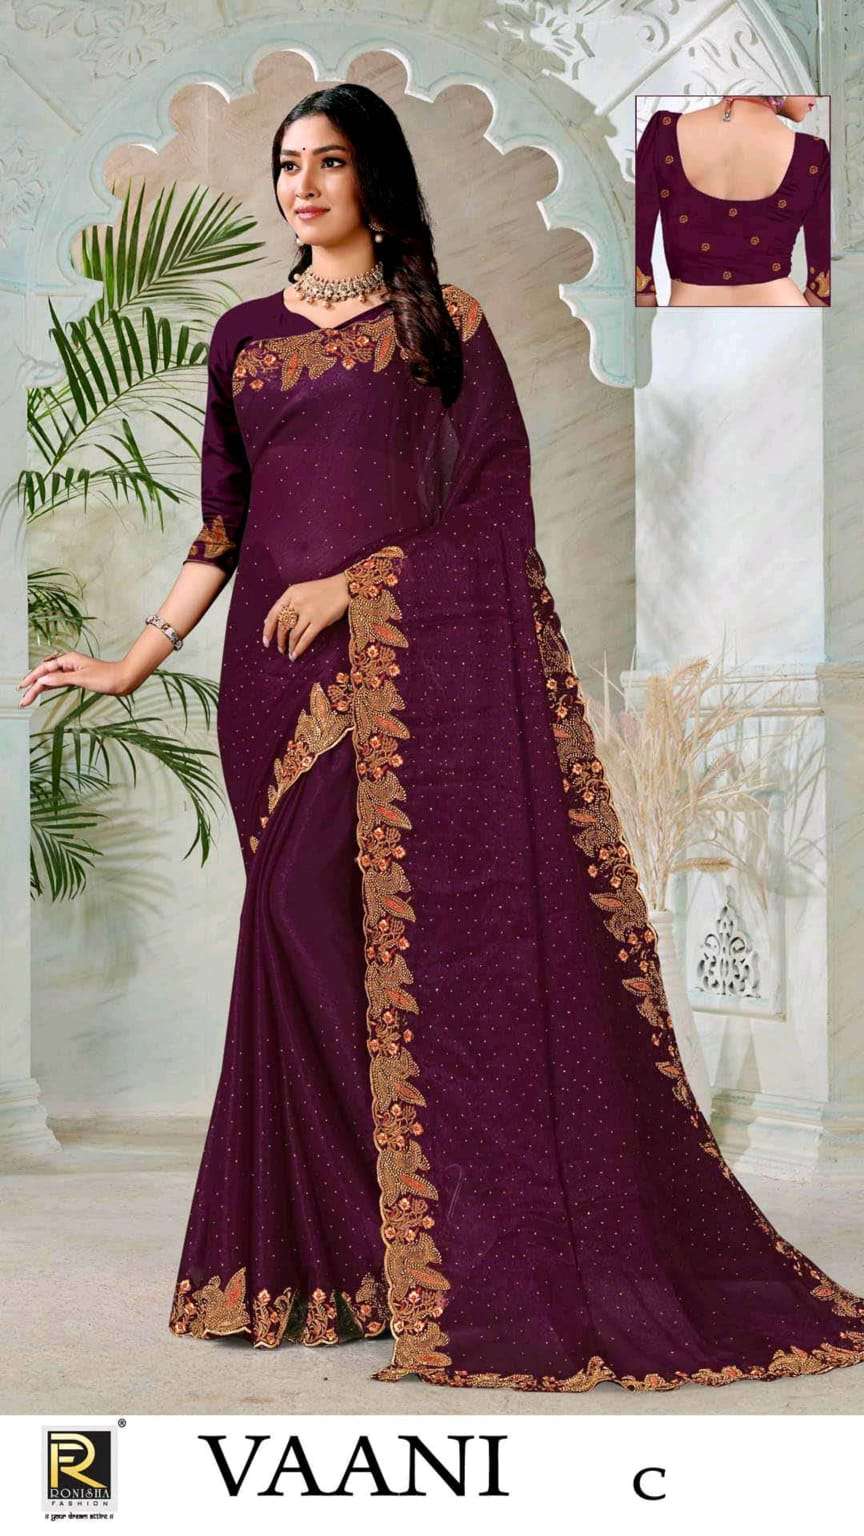 Vaani new launching Embroidery sarees Surat Manufacturing Brand